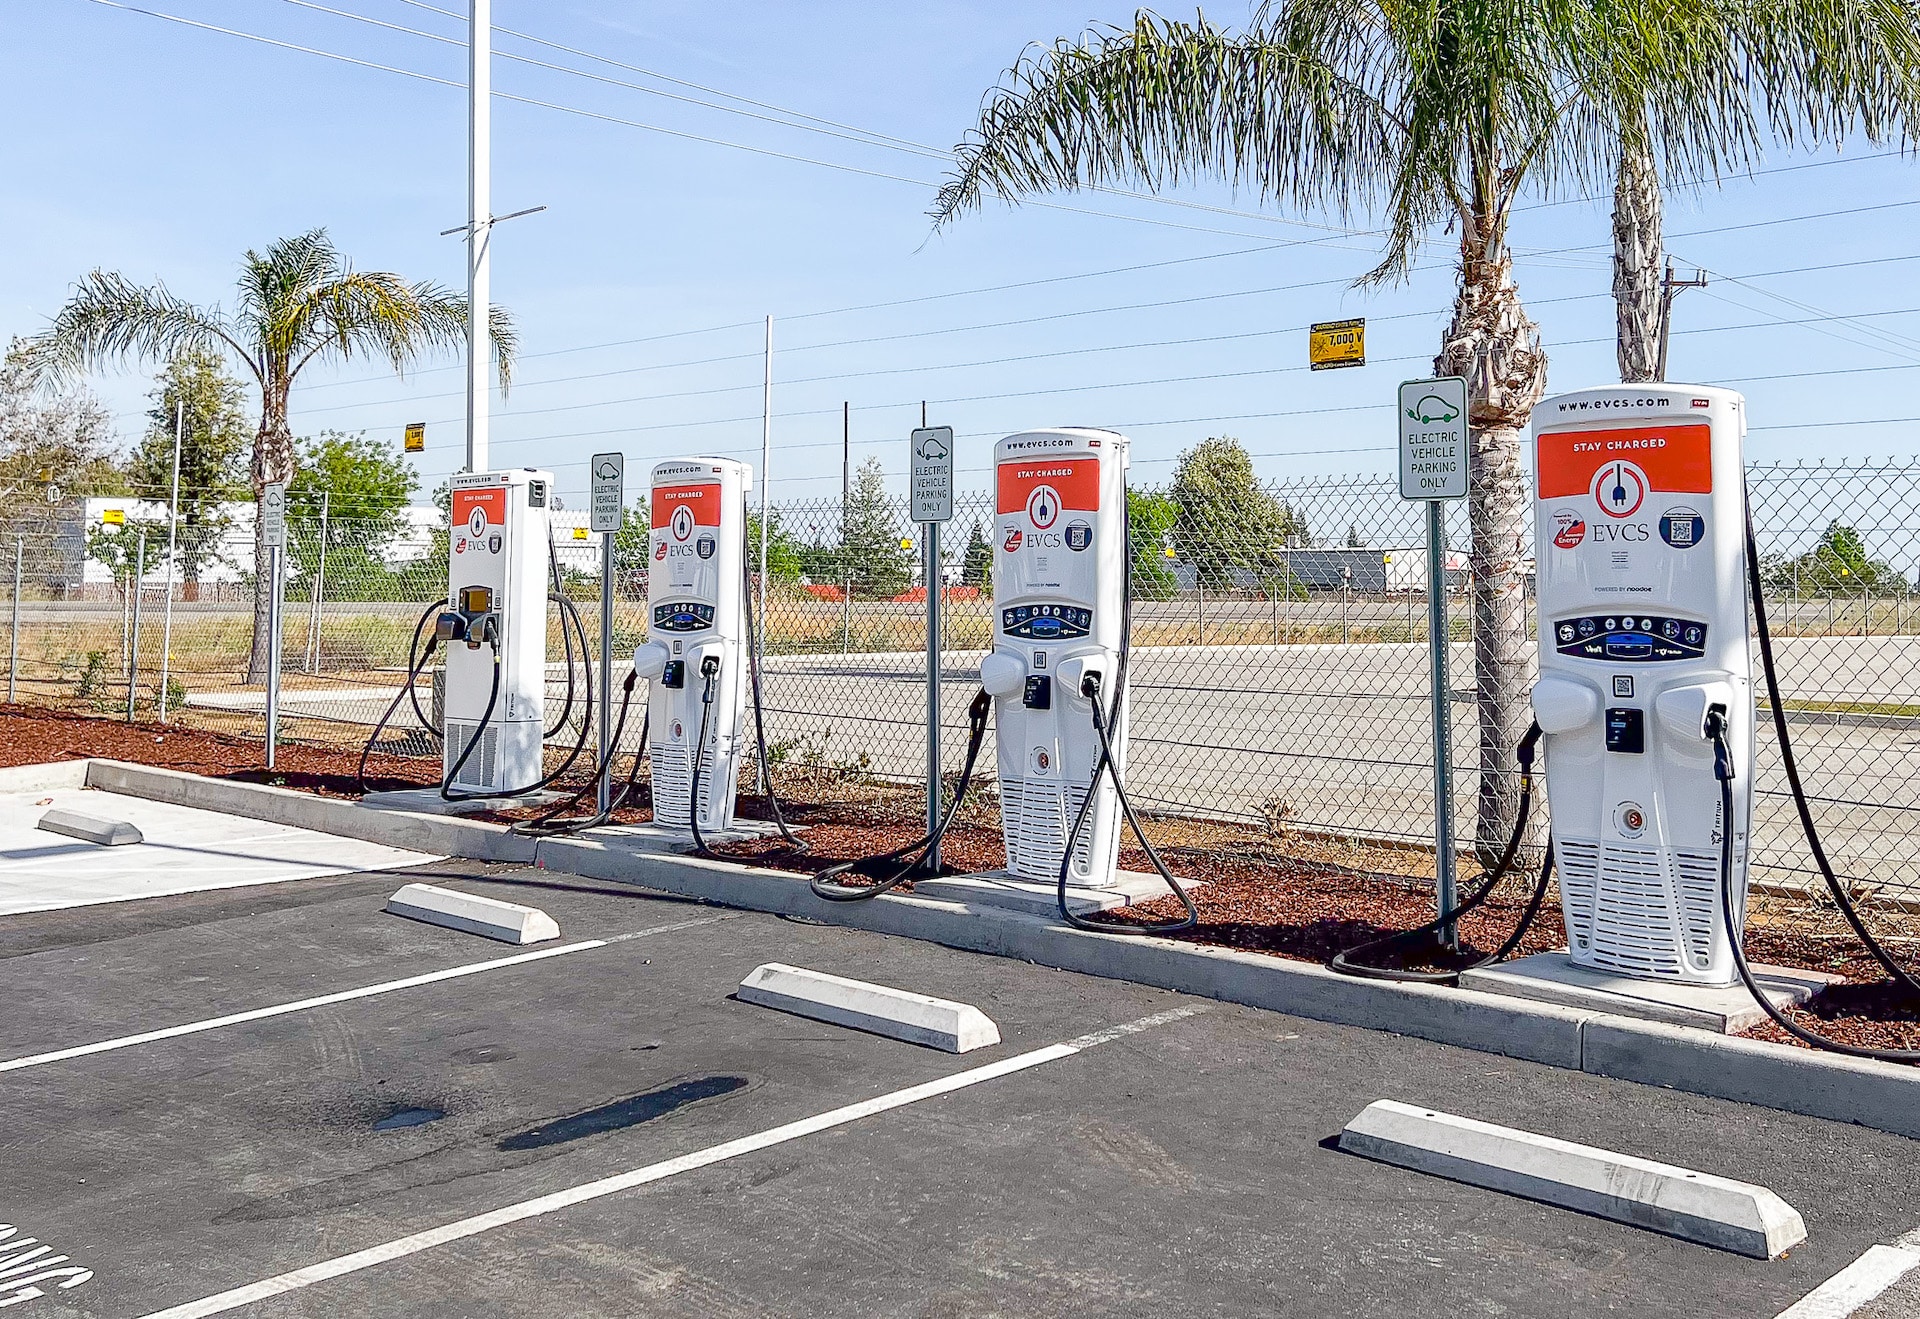 EVCS Lands 1.9M Grant to Boost EV Charging Infrastructure in Rural